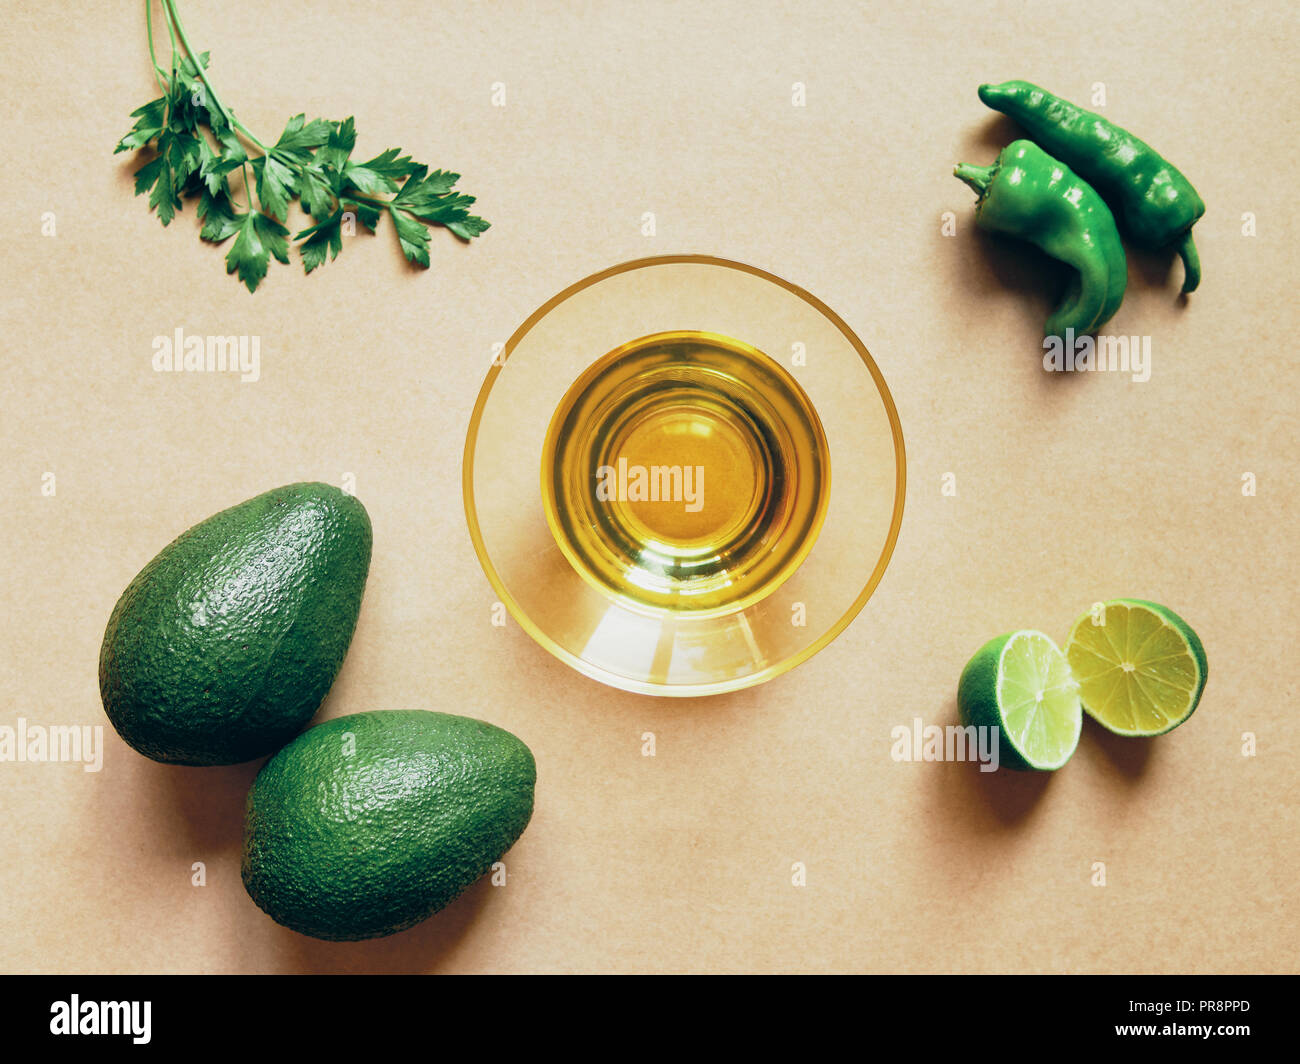 Avocado oil lemon and green pepper over a brown above view Stock Photo